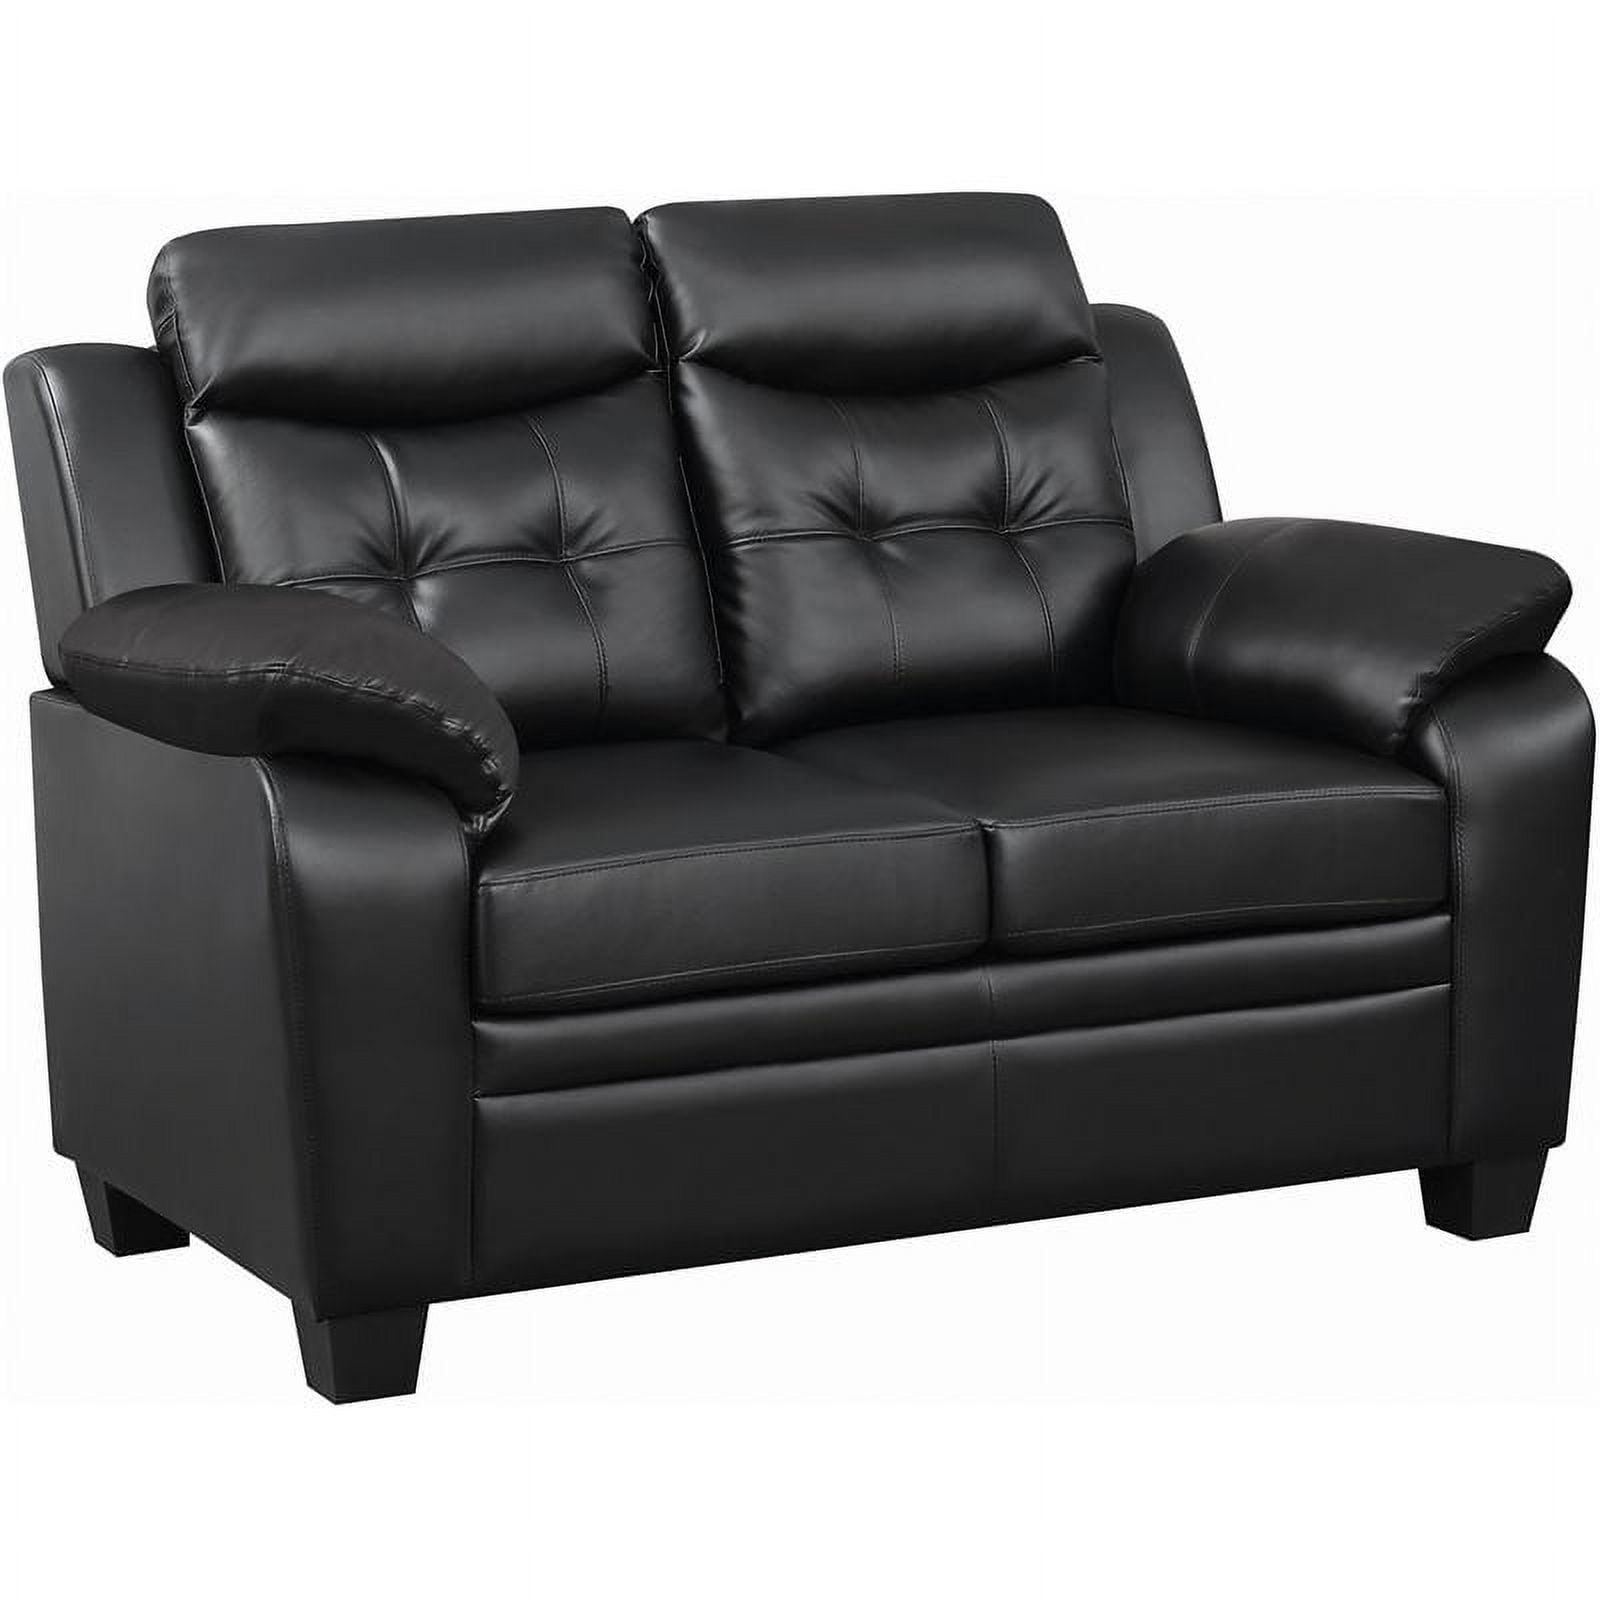 Chicago Bears Black Faux Leather Transitional Loveseat